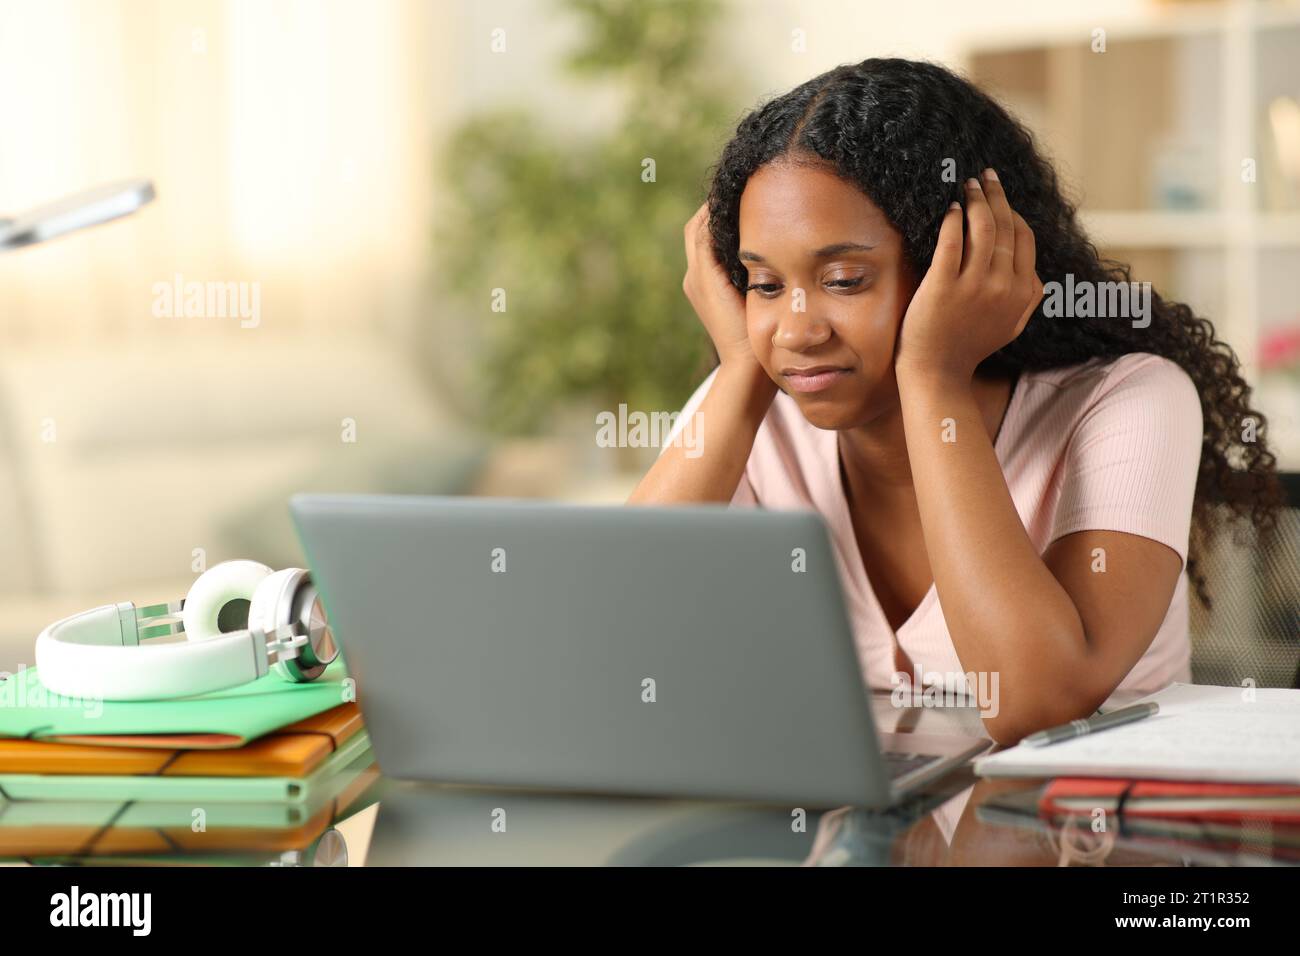 Disappointed black student checking laptop at home Stock Photo